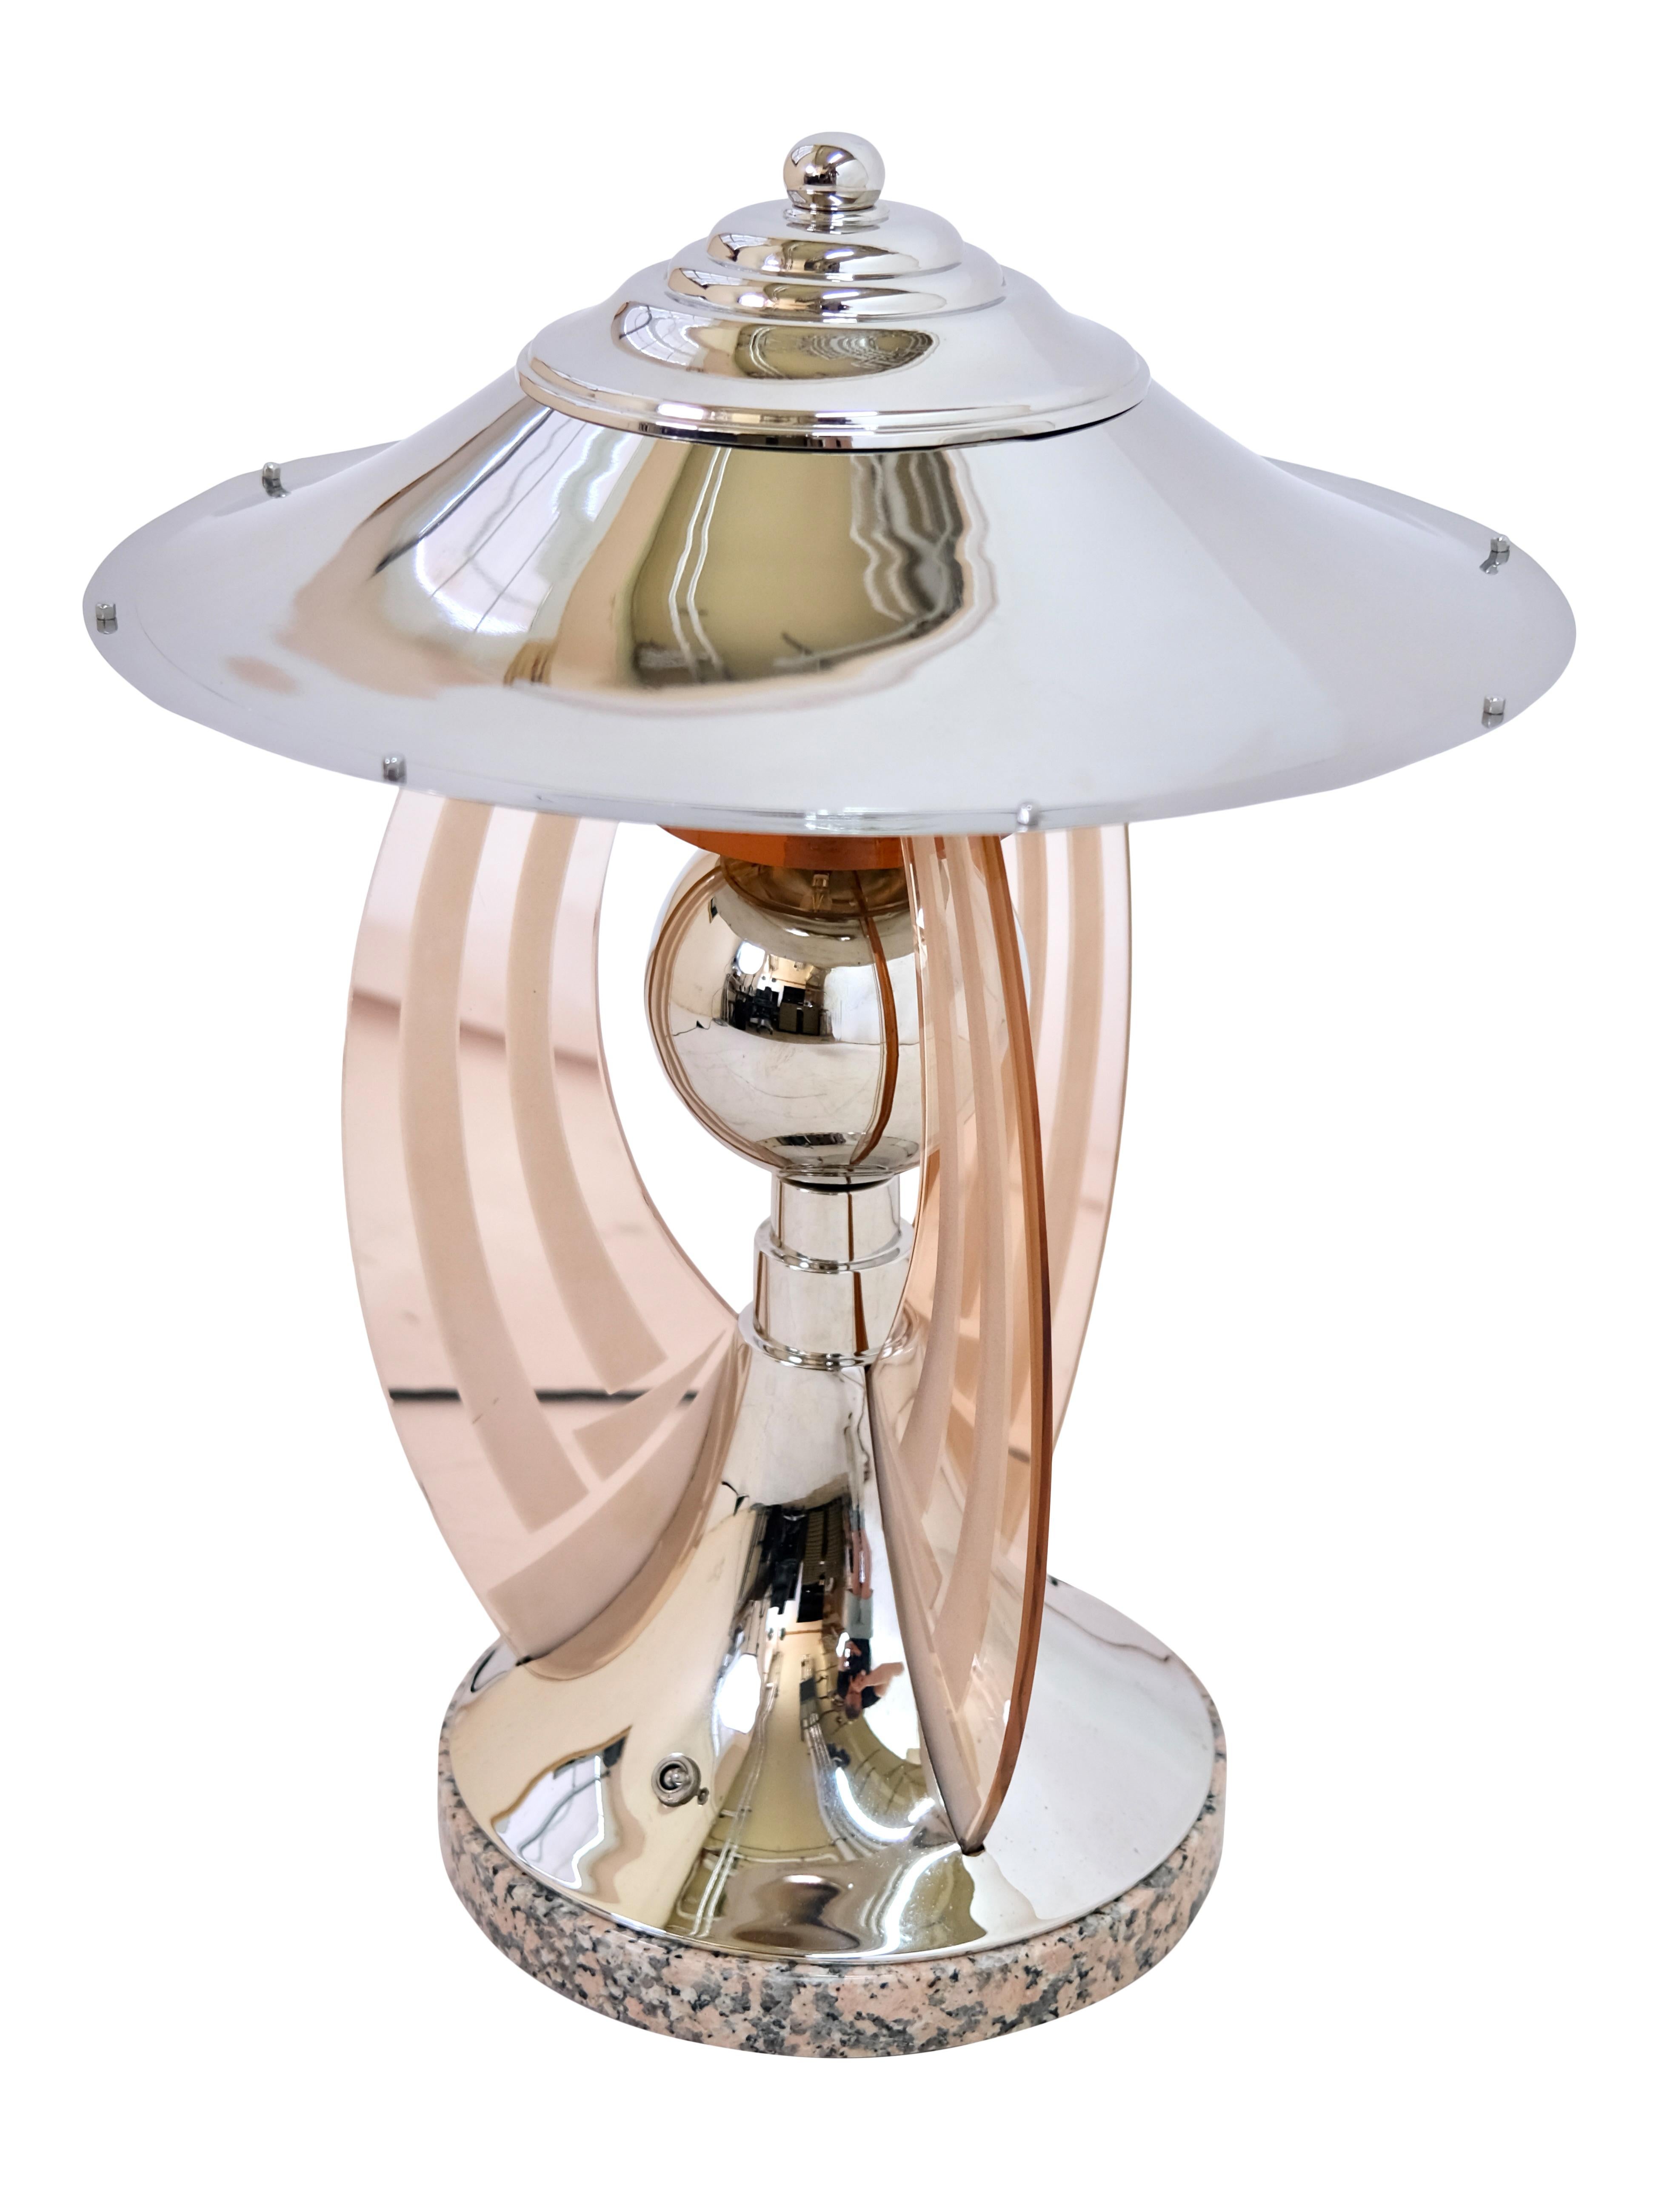 Chrome table lamp with rosaline colored glass arches

Round chrome table lamp
Rosalin colored glass arches
Marble base

Original Art Deco, France 1930s

Dimensions:
Diameter: 45 cm
Height: 55 cm. 